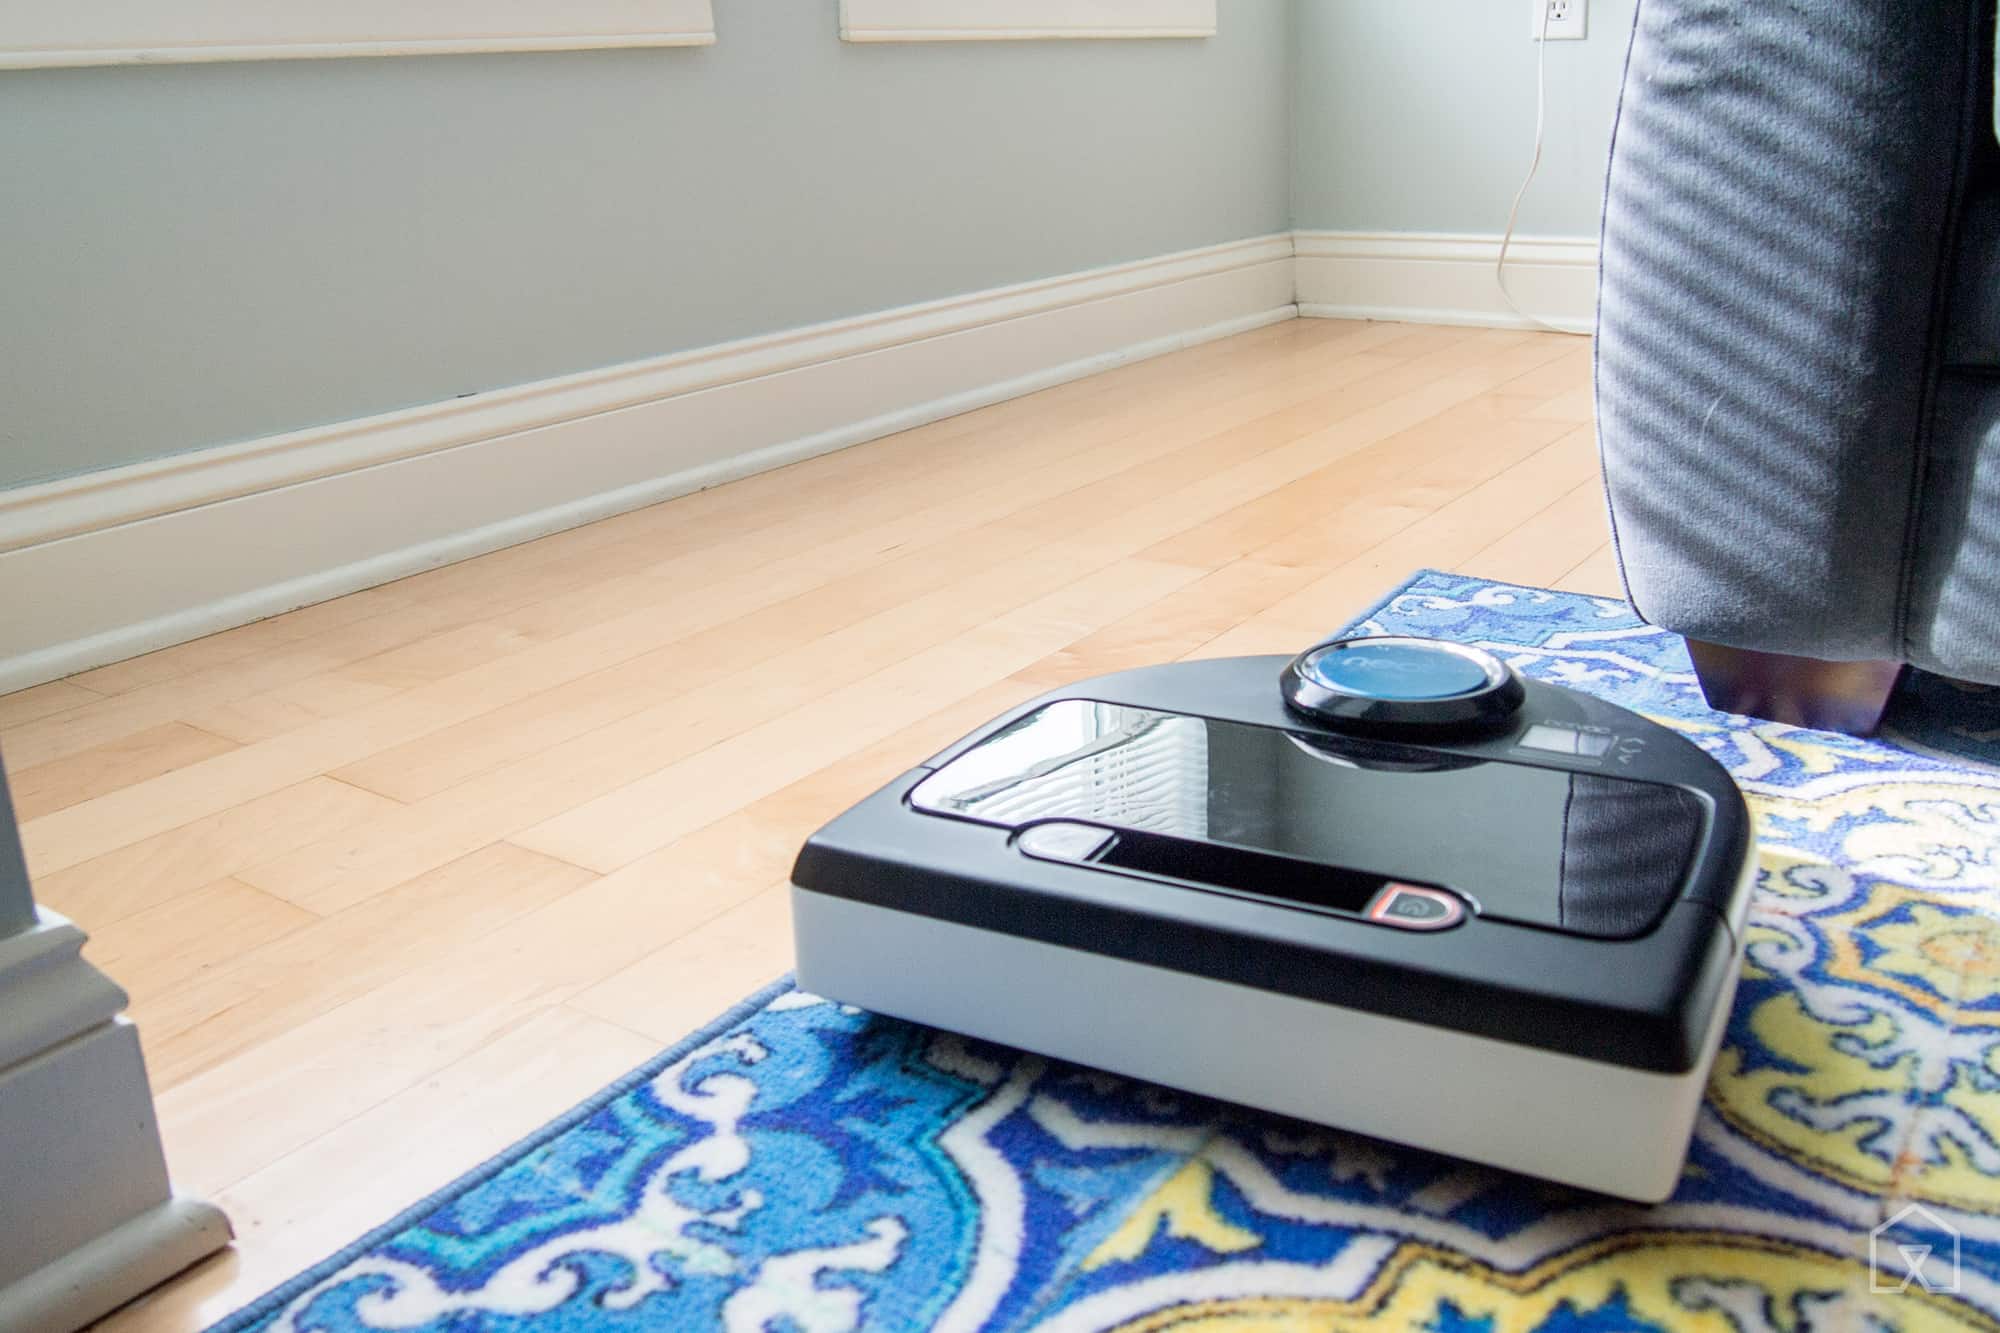 The Buying Guide to Purchasing the Best Robot Vacuums for Carpets